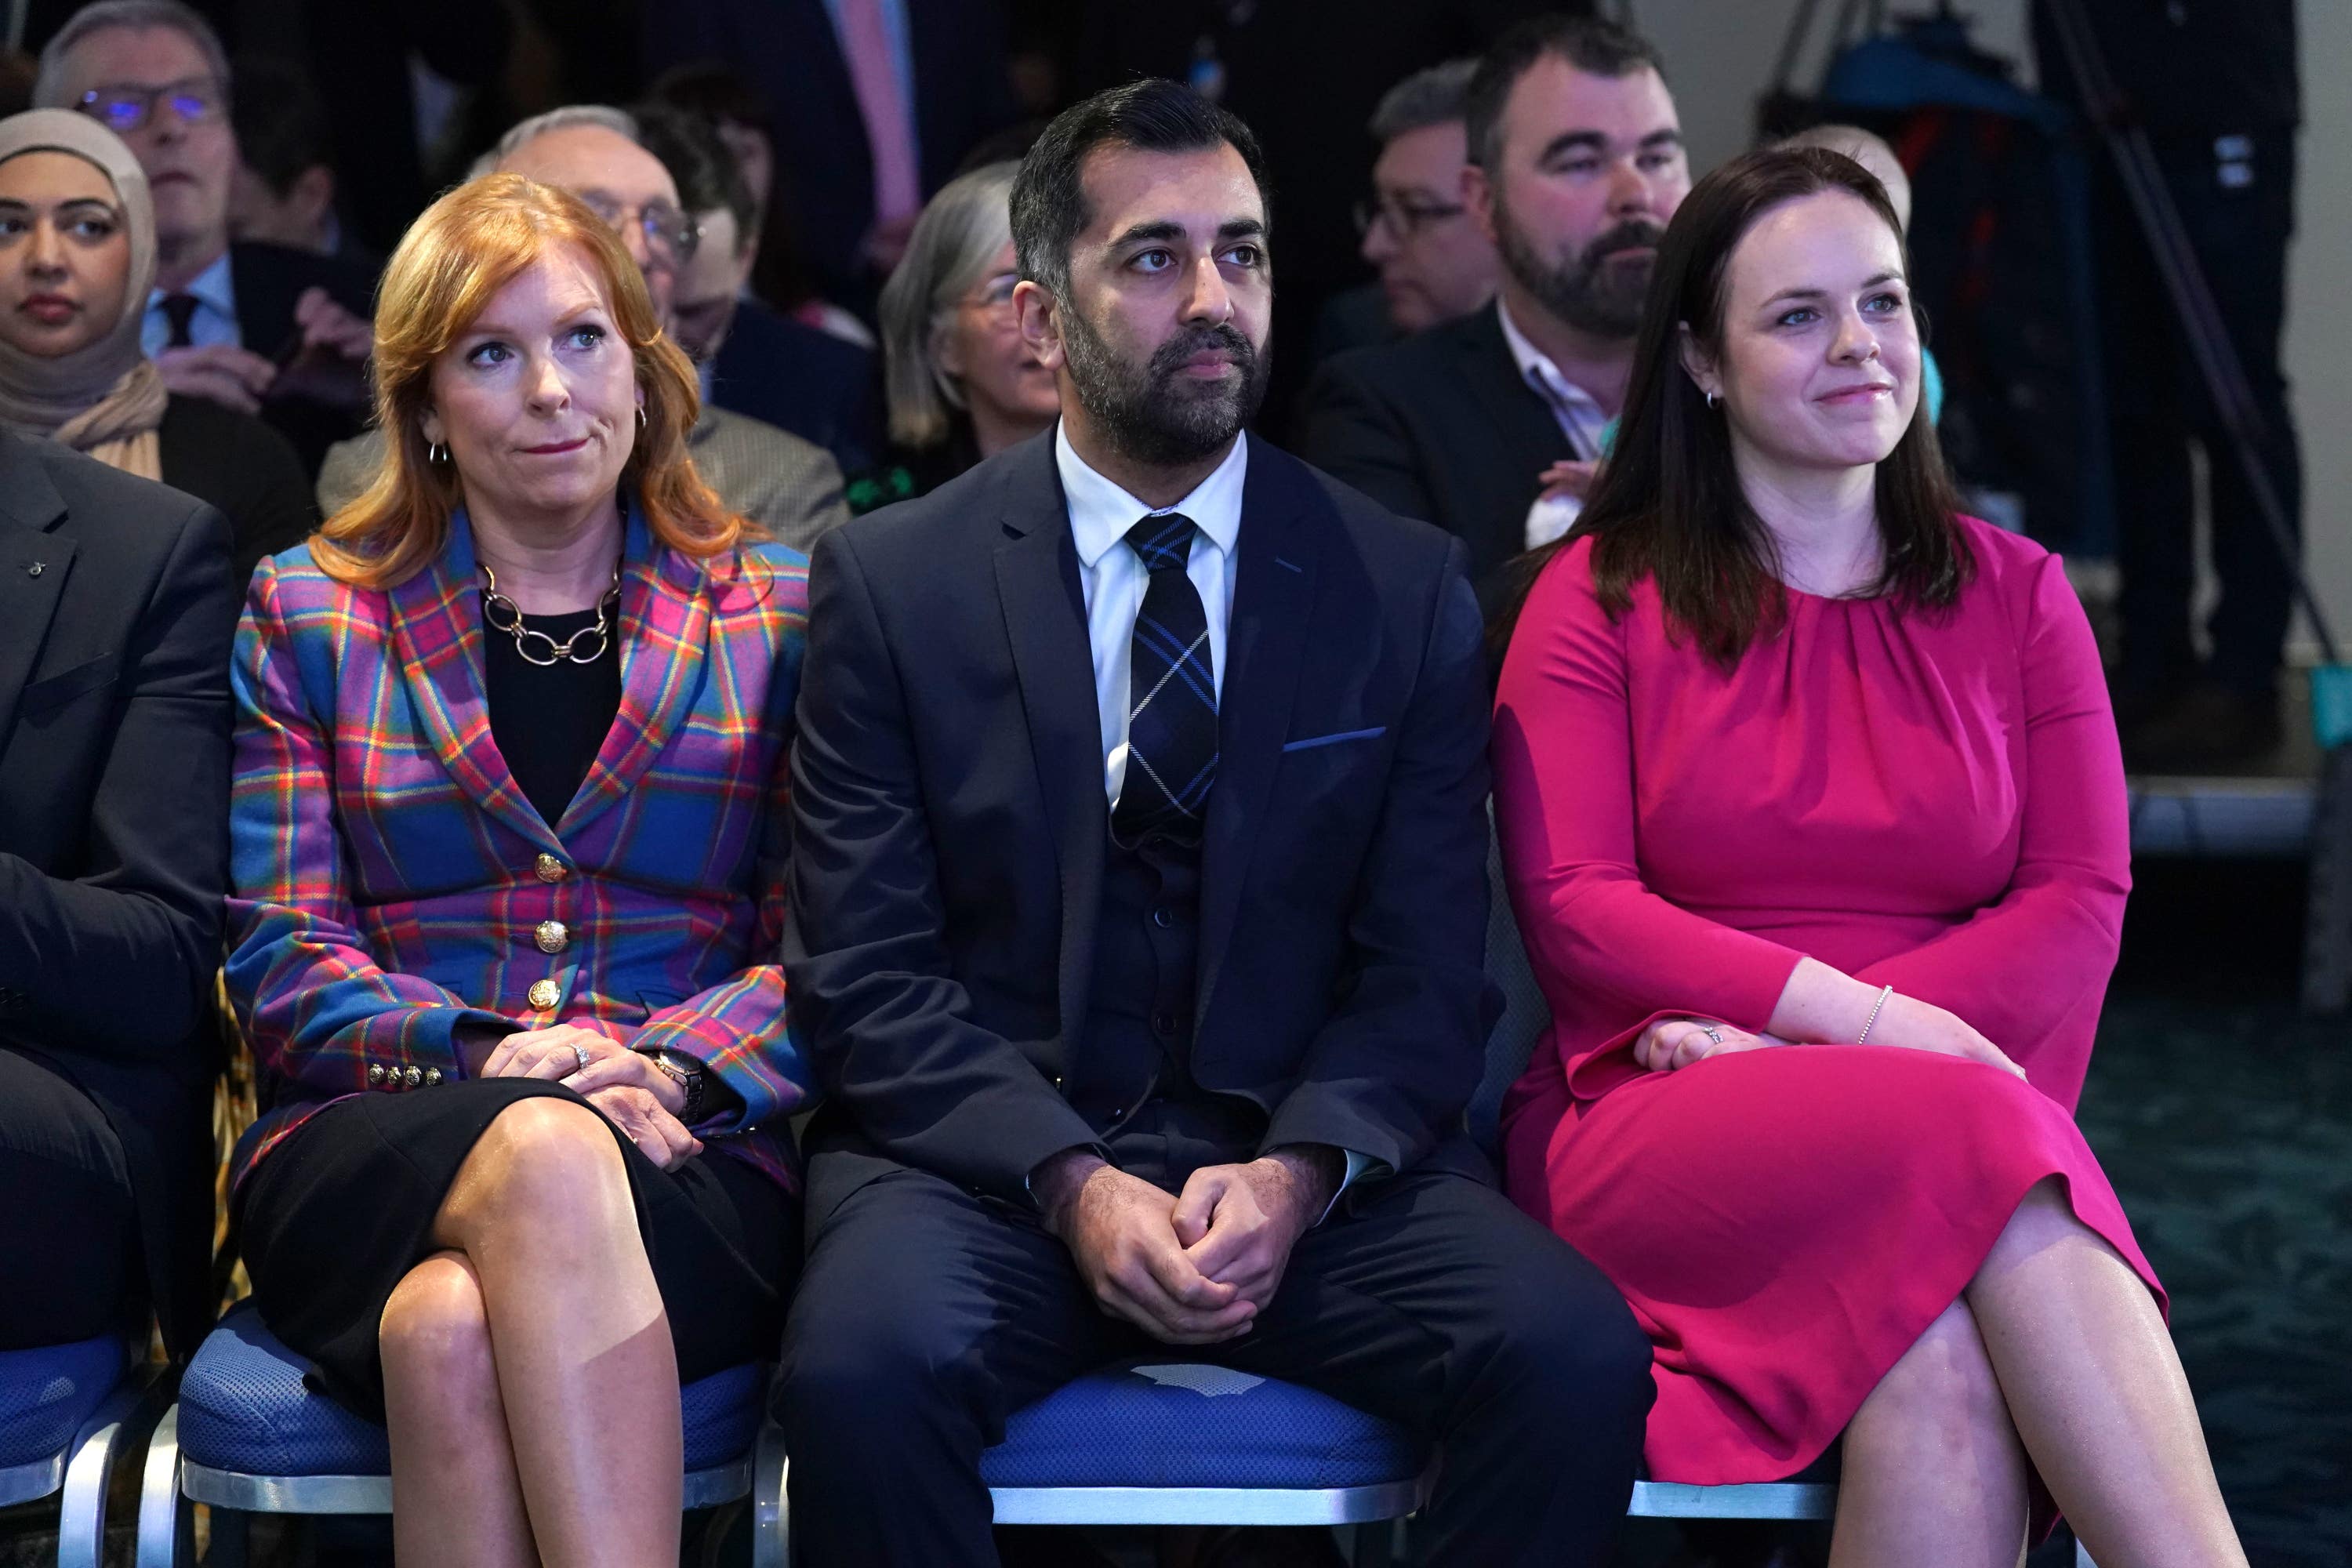 Humza Yousaf said during the SNP leadership campaign that he was unable to attend a key vote on equal marriage.